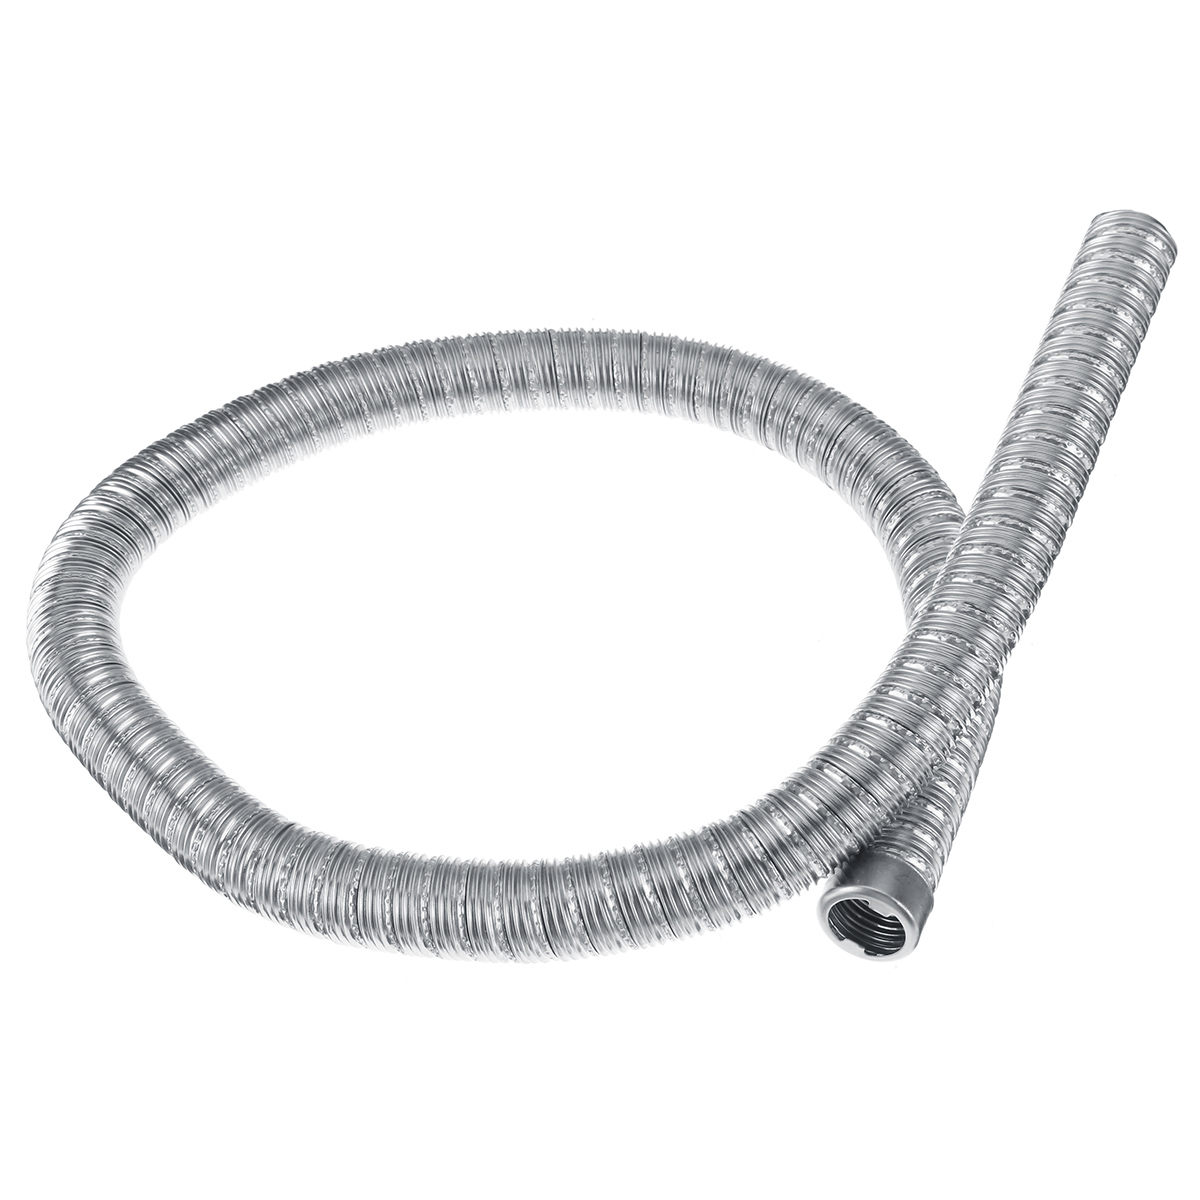 100cm-ID24mm-Stainless-Steel-Air-Diesel-Exhaust-Pipe-With-Cap-For-Webasto-Heater-1783700-4